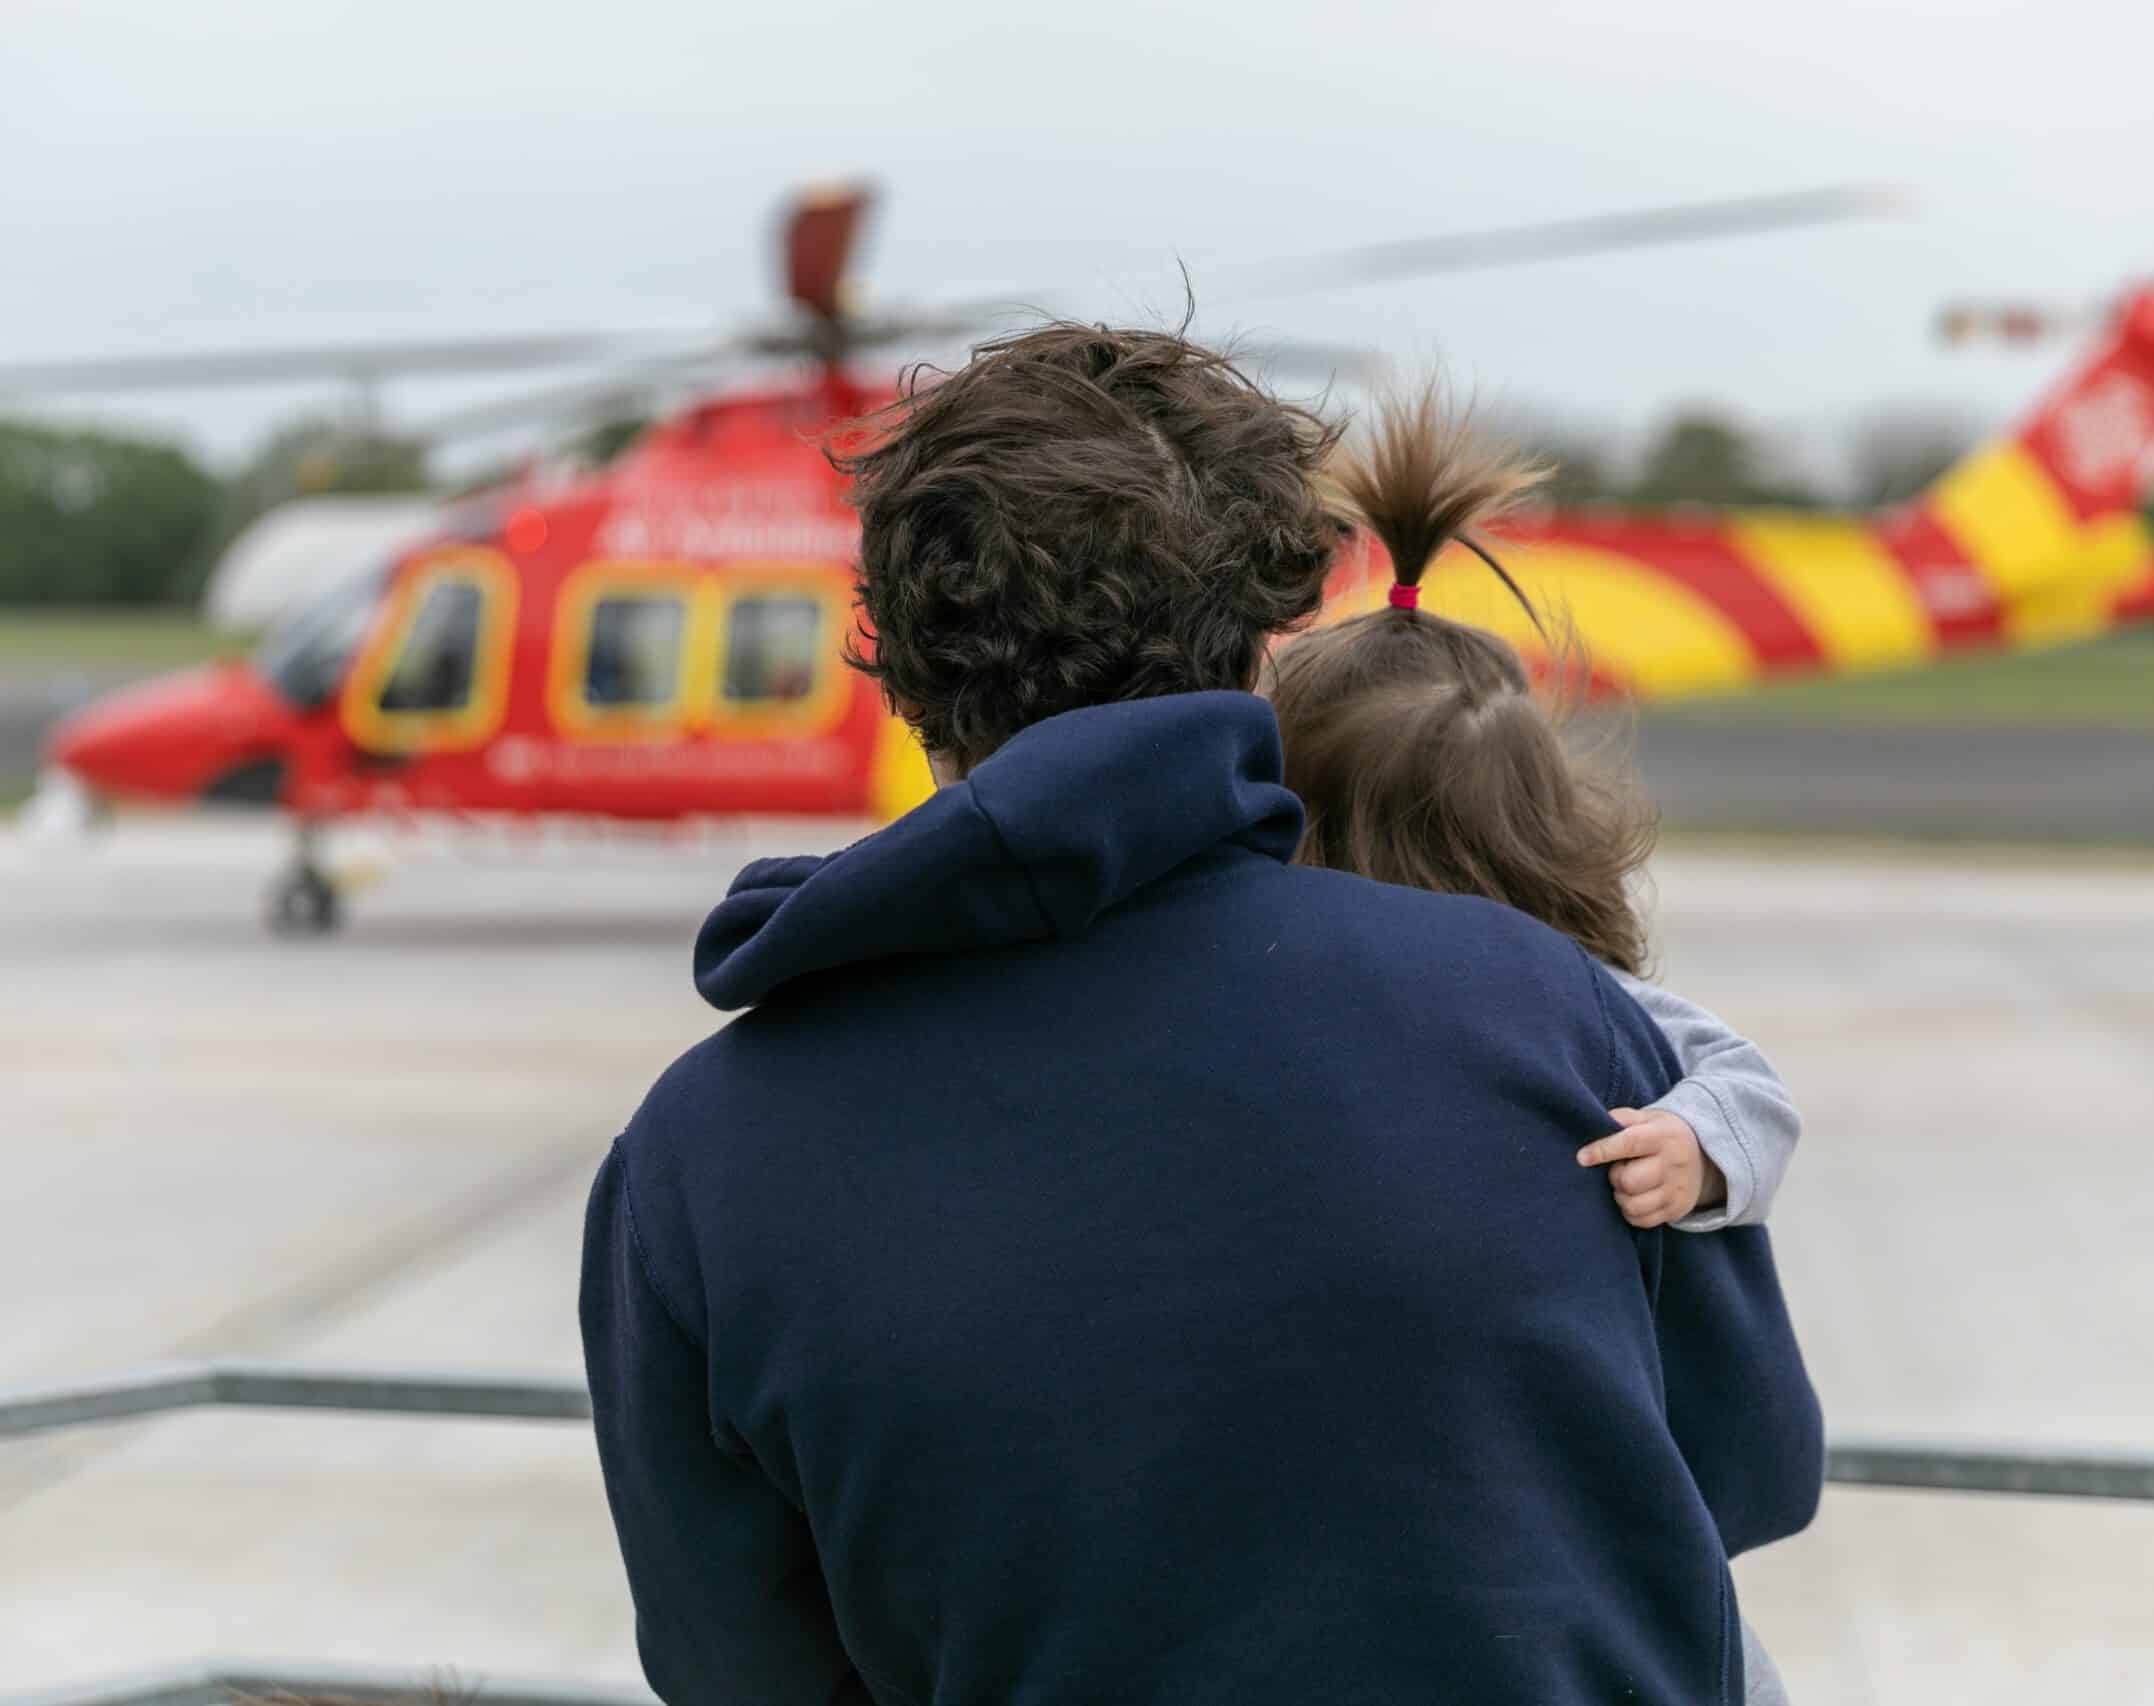 Patient day- Farther and Daughter want the AW169 get ready to fly